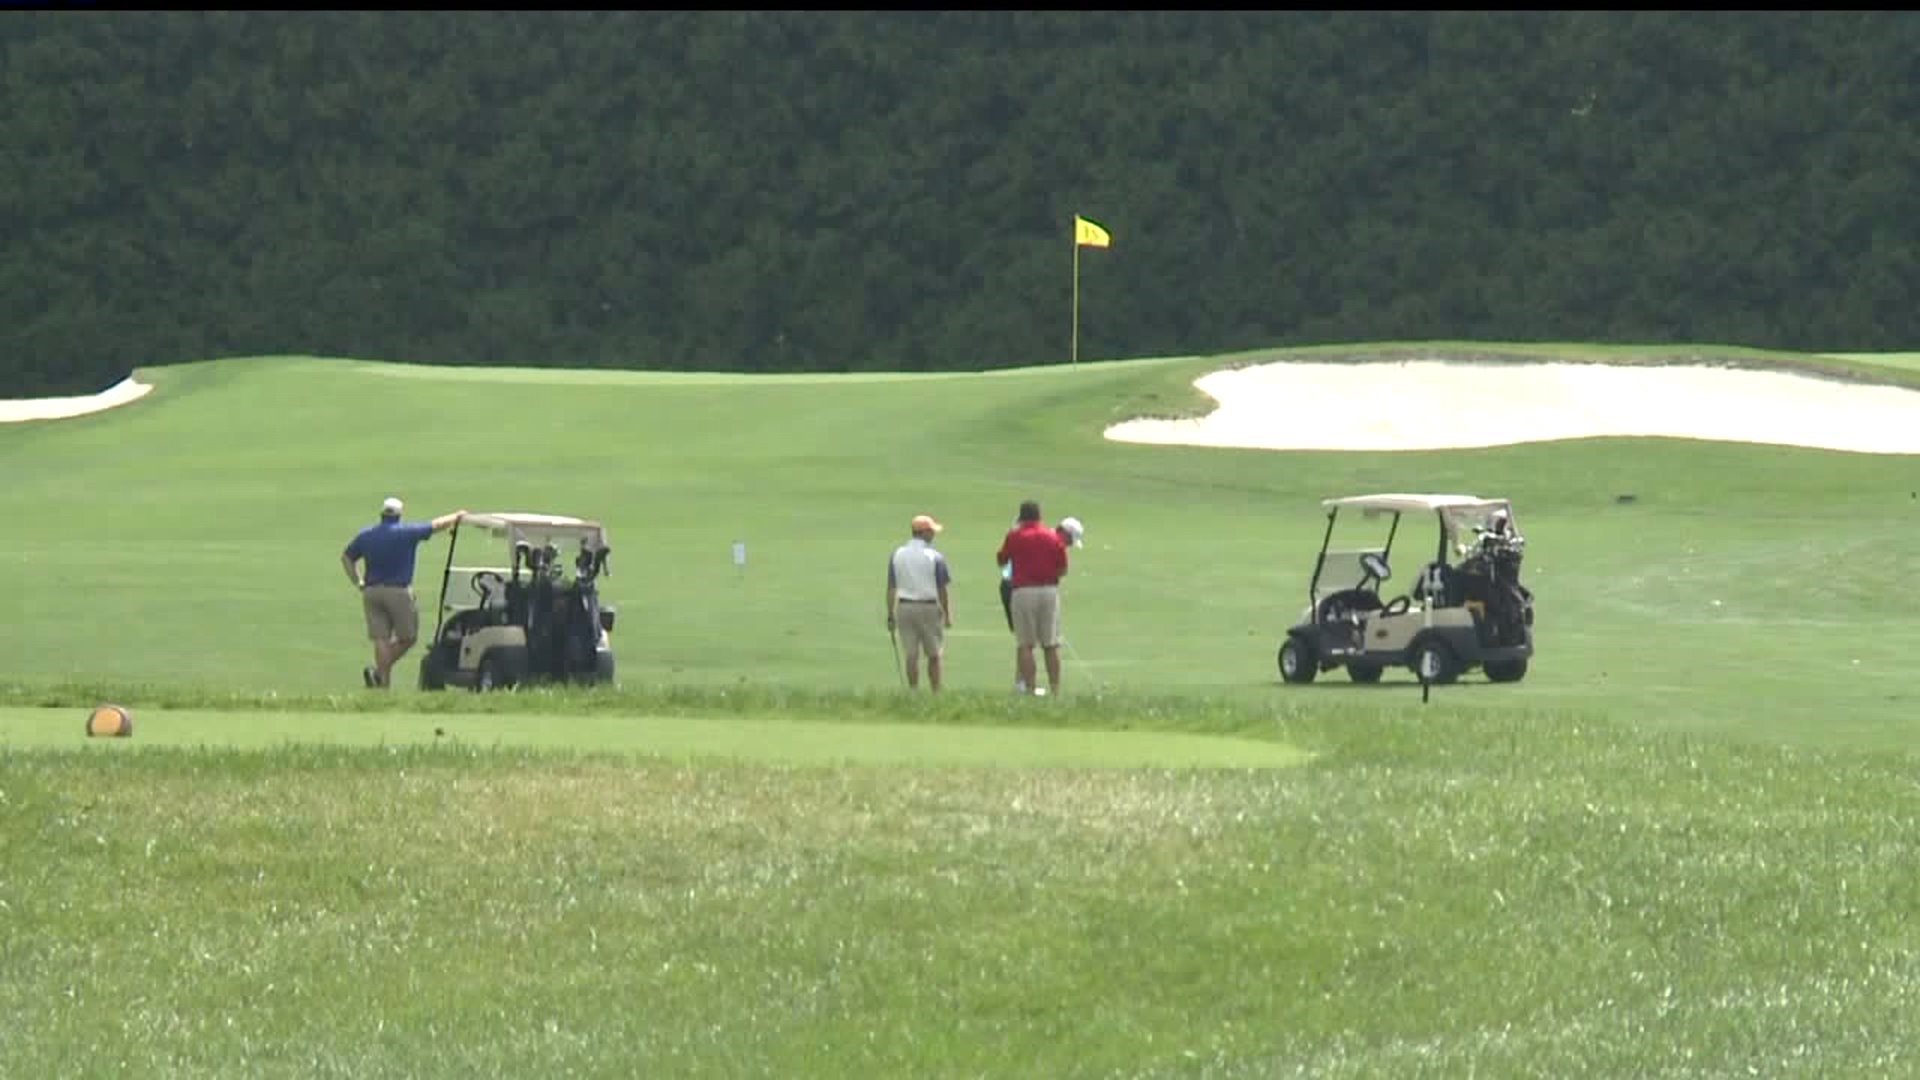 The annual Our Family Foundation Golf Outing is being held at several golf courses across Central PA to benefit the Children`s Miracle Network